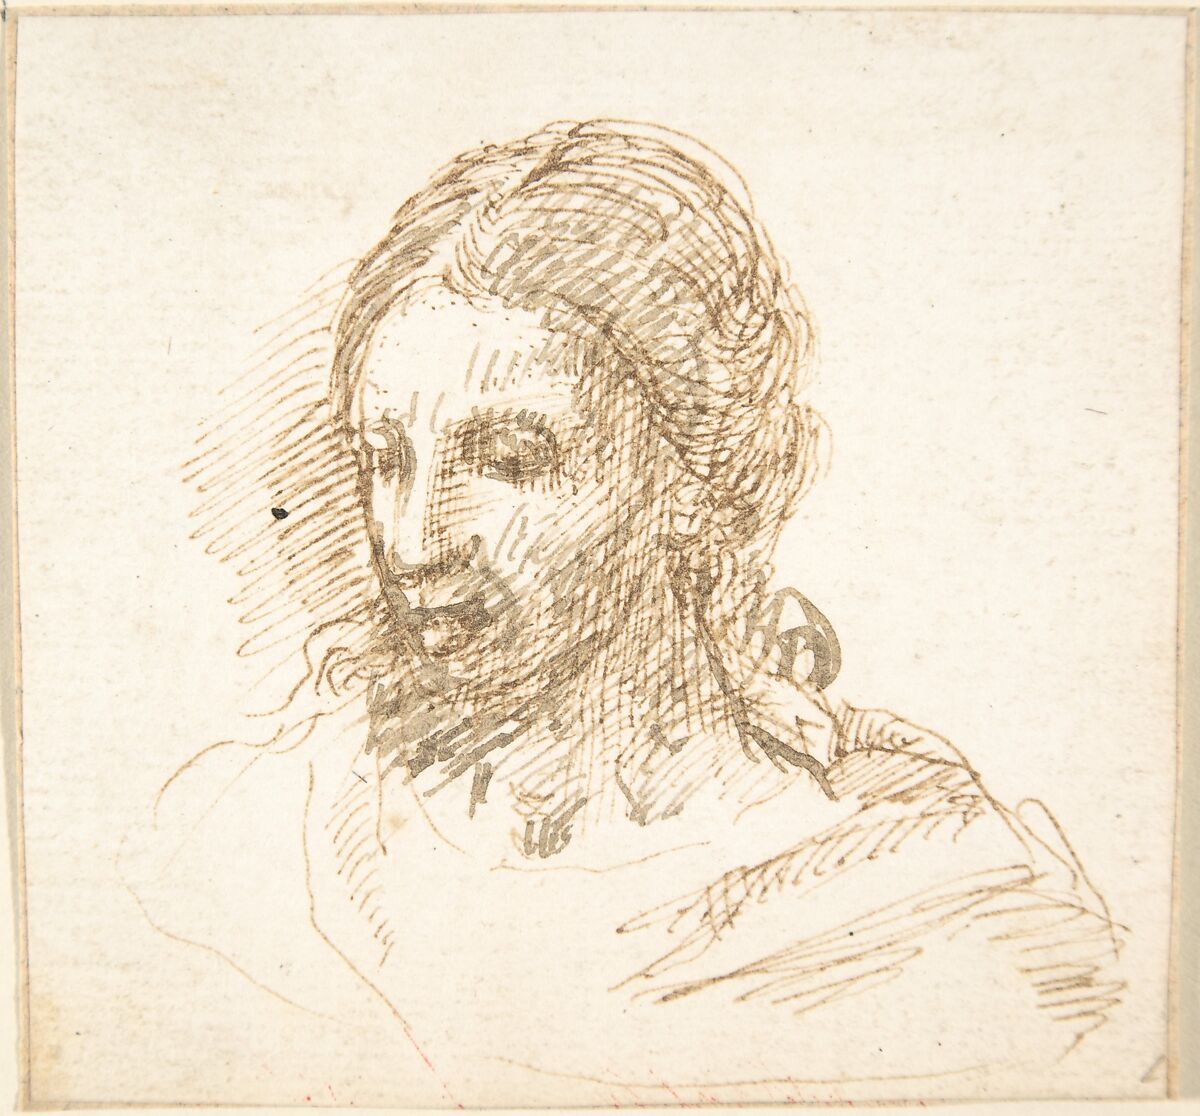 Head of Christ, Attributed to Pedro  Duque Cornejo (Spanish, 1677–1757), Pen and dark brown ink. Some contours reinforced with pen and darker brown ink. On off-white paper 